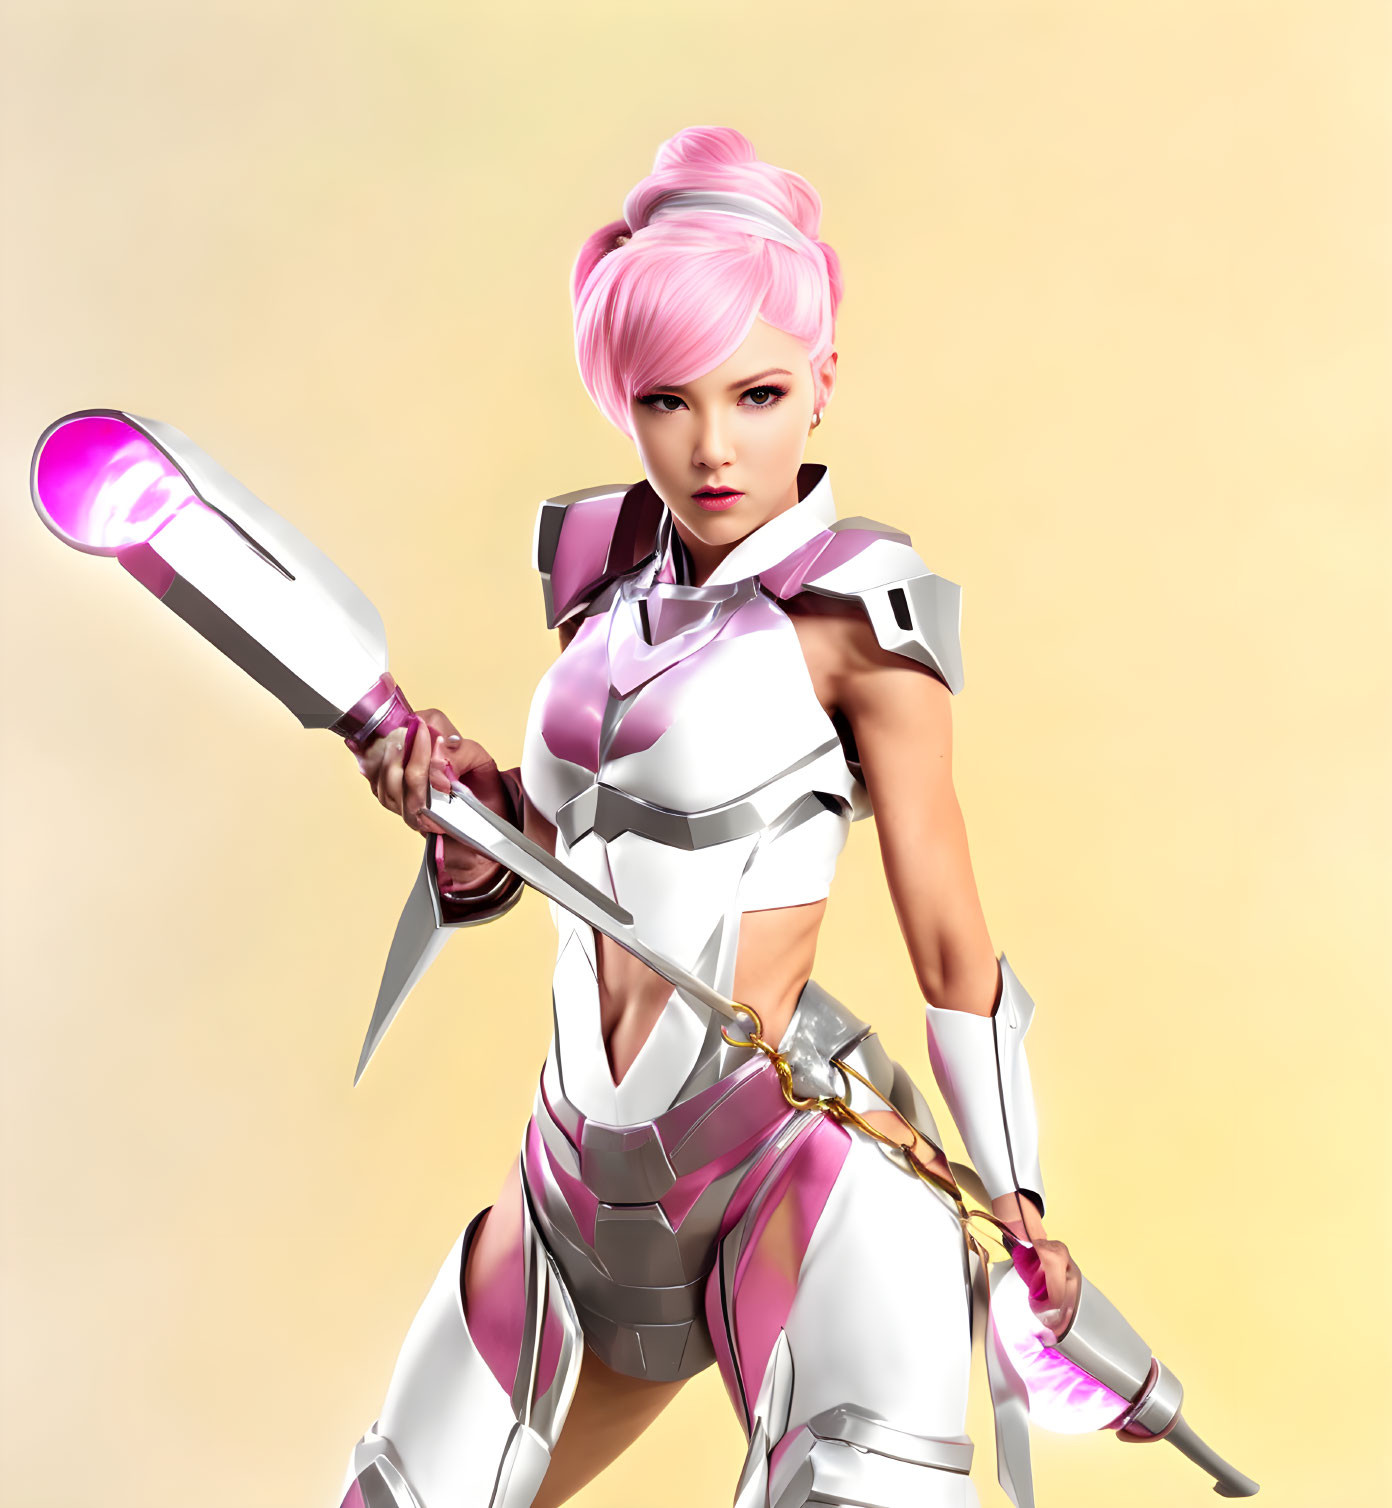 Digital illustration of female character in pink hair, futuristic white armor, wielding glowing spear